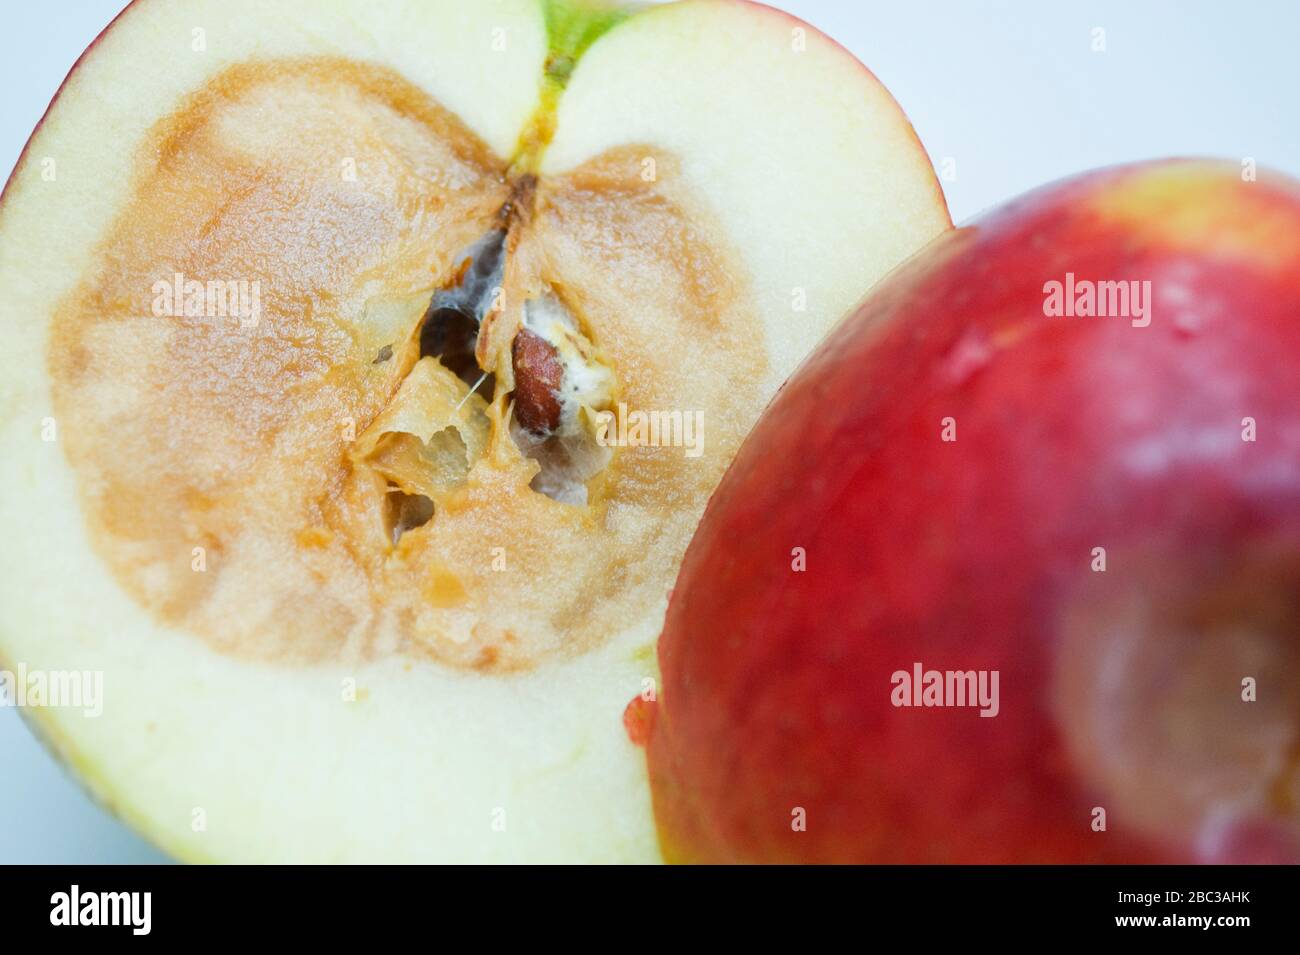 Tight crop of rotten apple sliced in half to expose rotten core. Other half with bruise on skin. Stock Photo